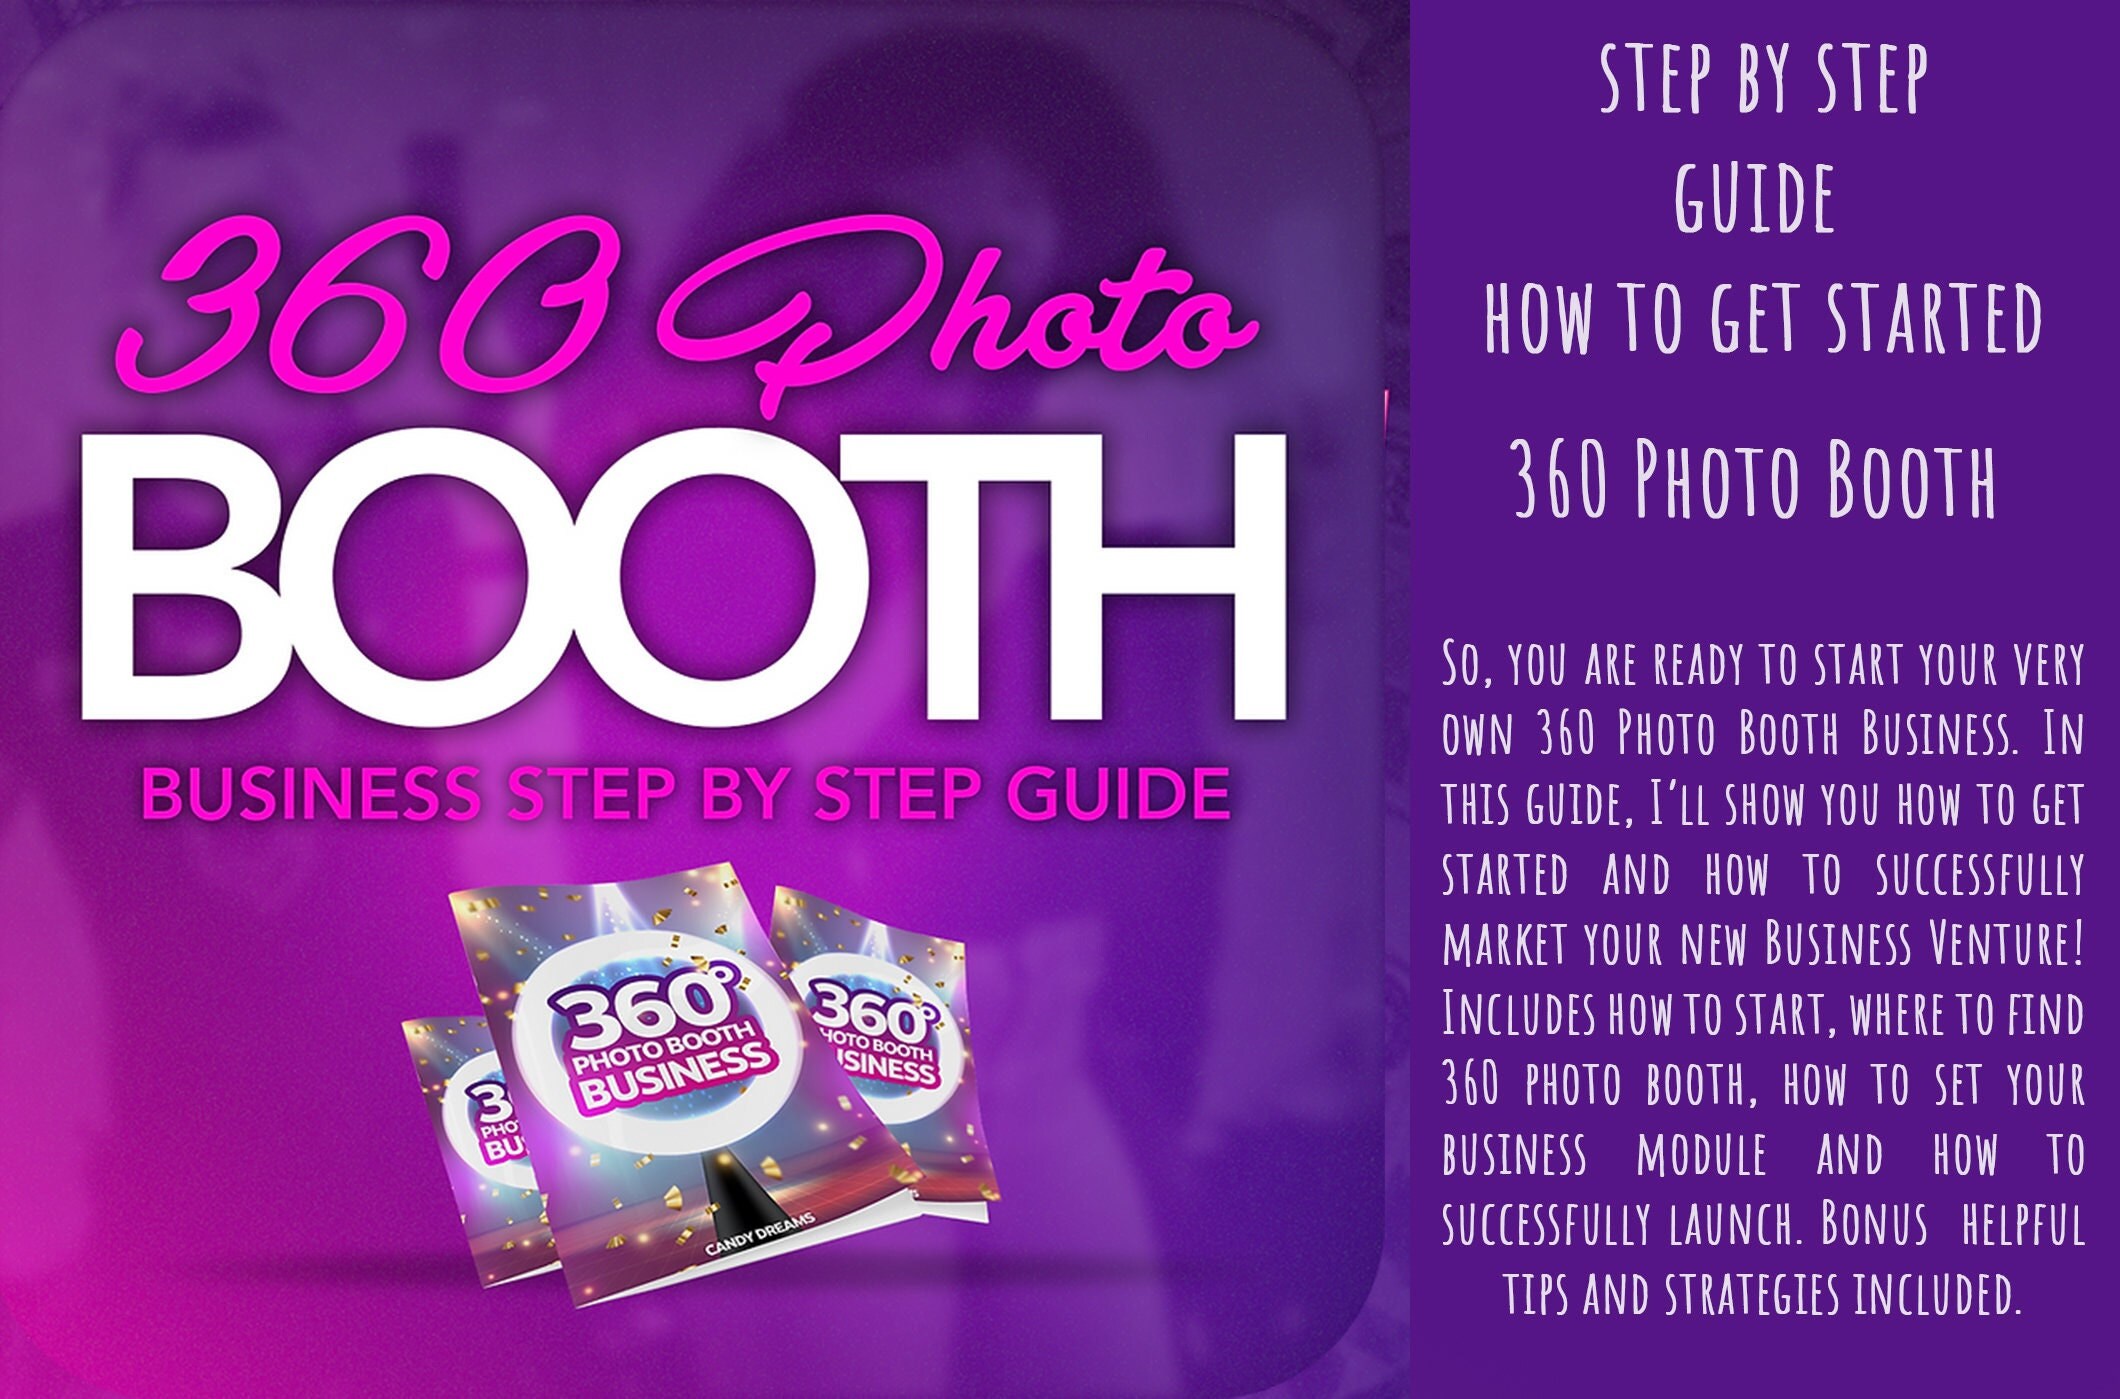 360 photo booth business plan